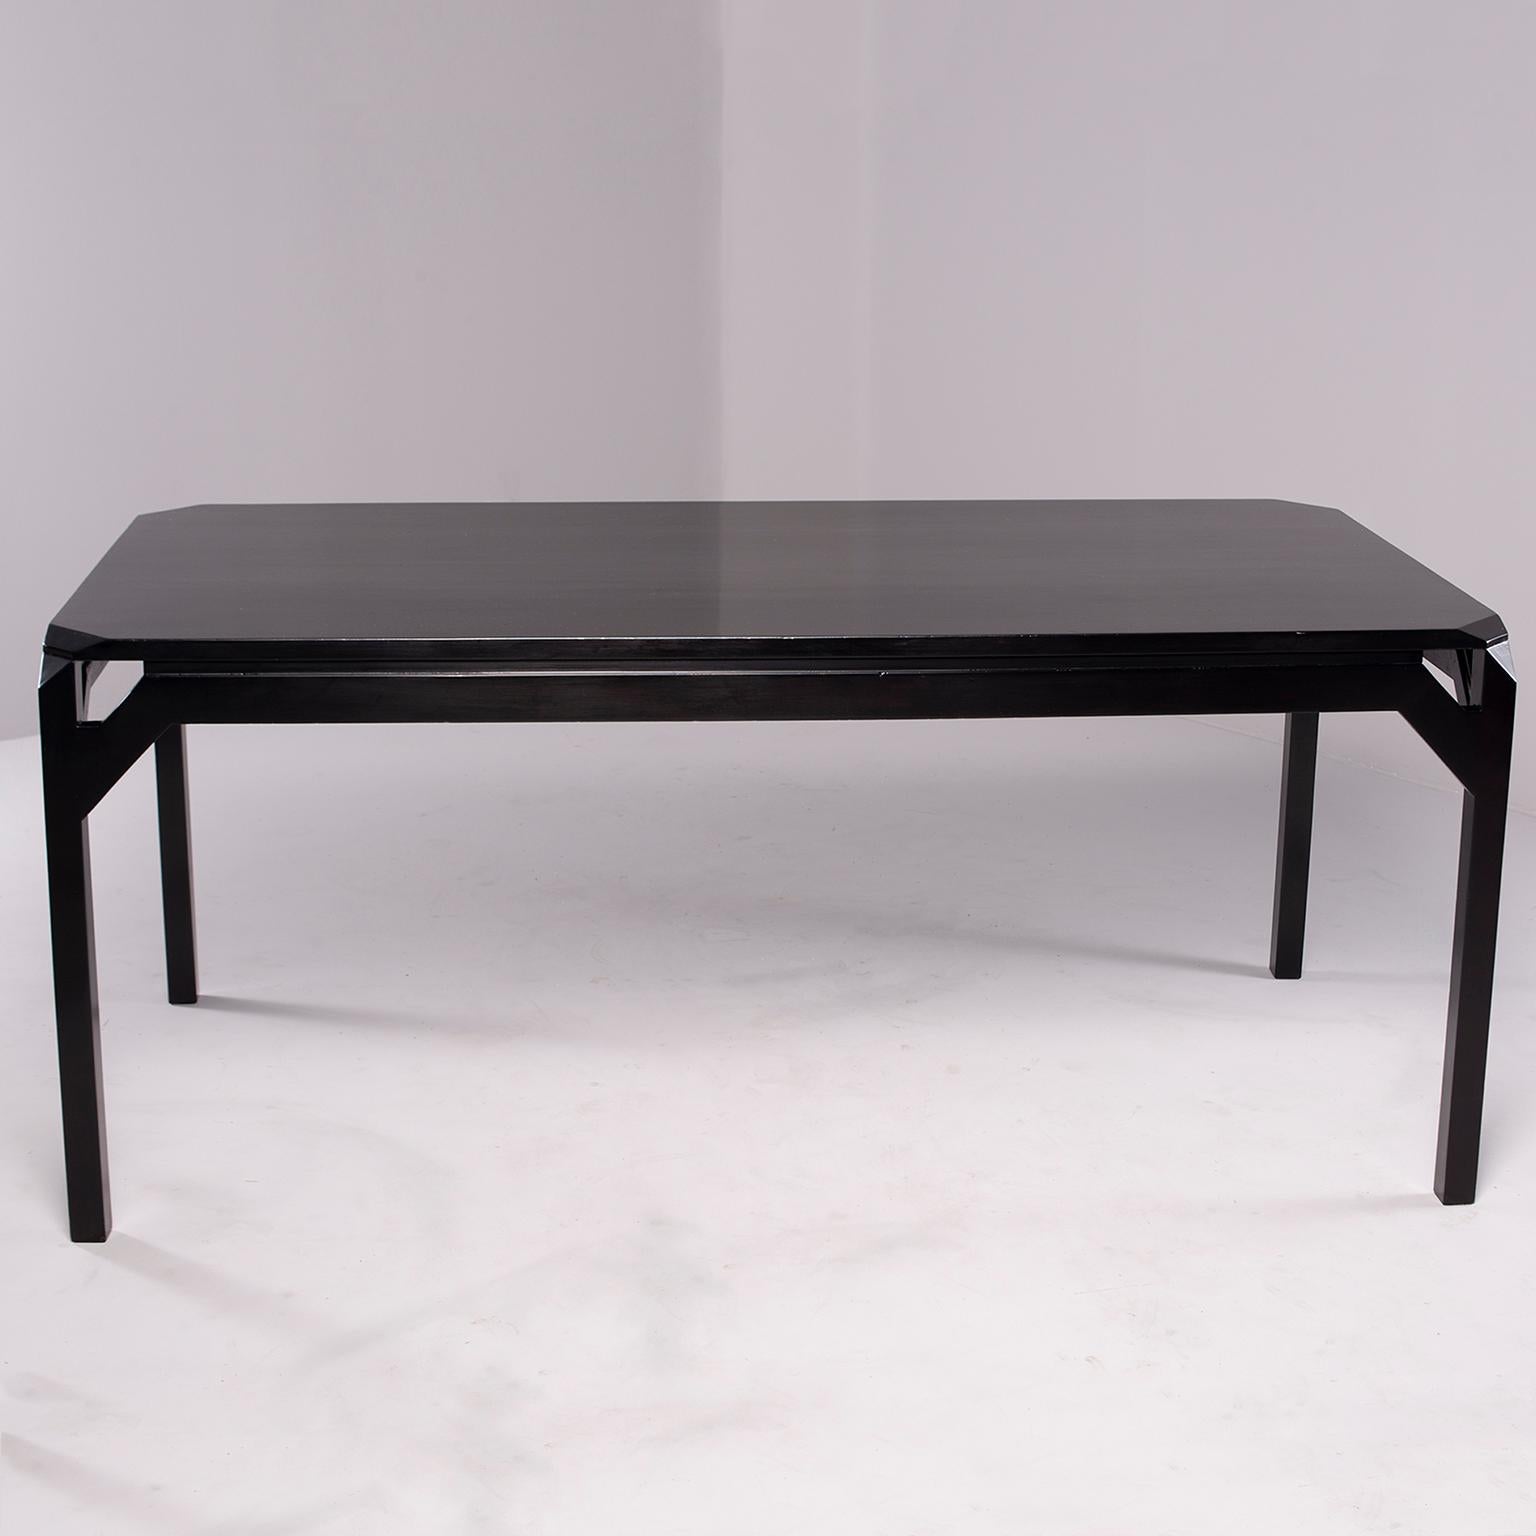 Found in England, this circa 1970 beech table has a new, professionally applied ebonized finish. Unique open work detail at each corner formed by apron. Apron clearance height is 26.75” high. No leaves. Excellent vintage condition.